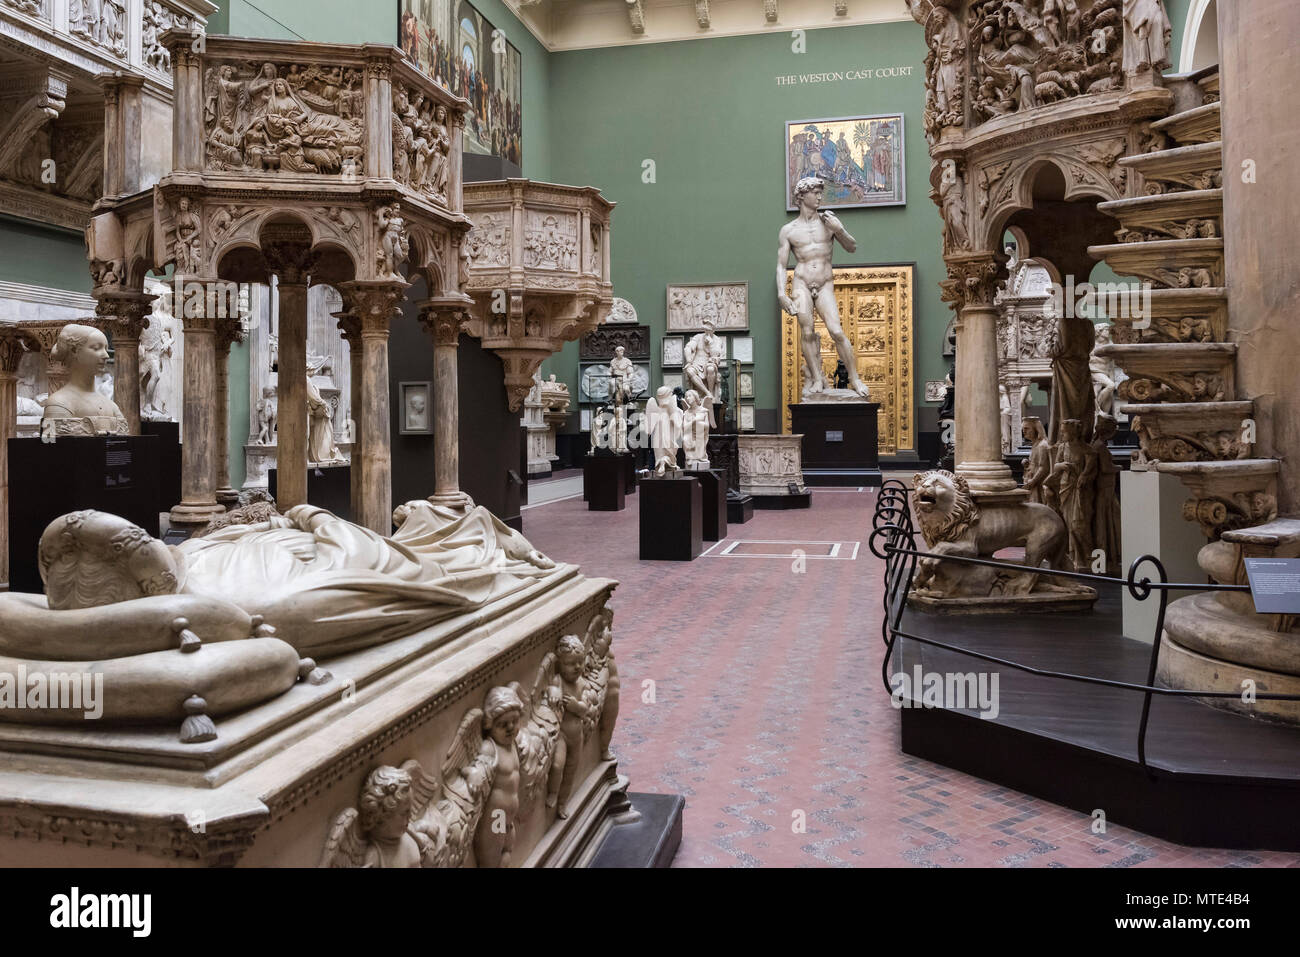 Masterpieces in Plaster: Inside the V&A Museum